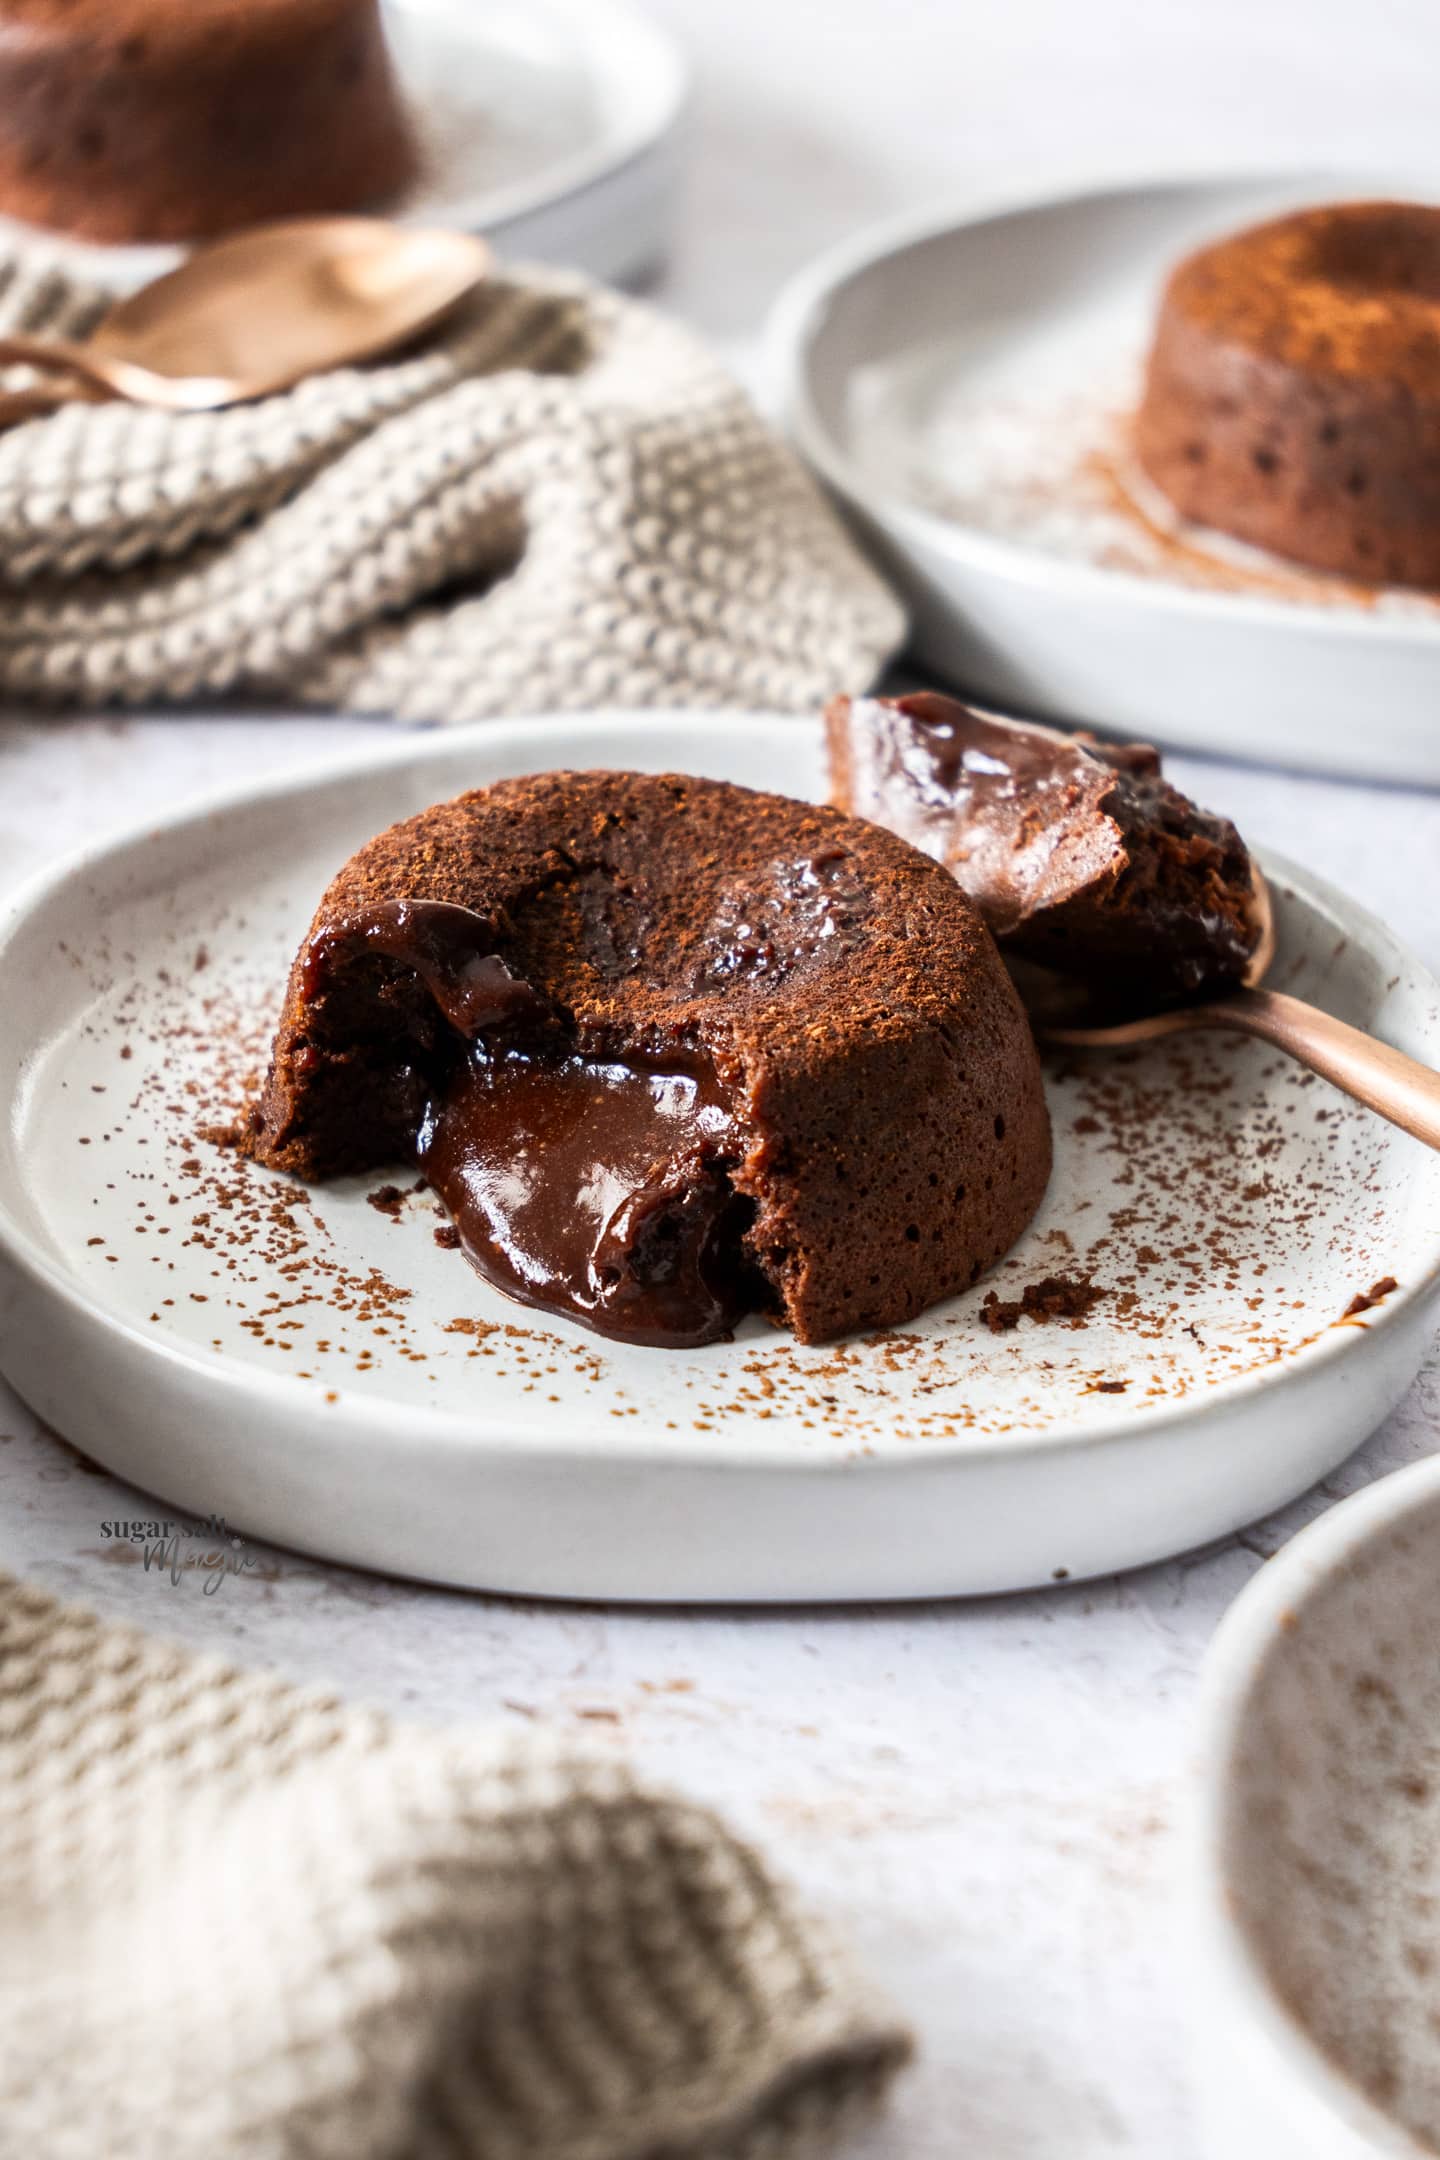 A chocolate fondant showing the gooey middle.